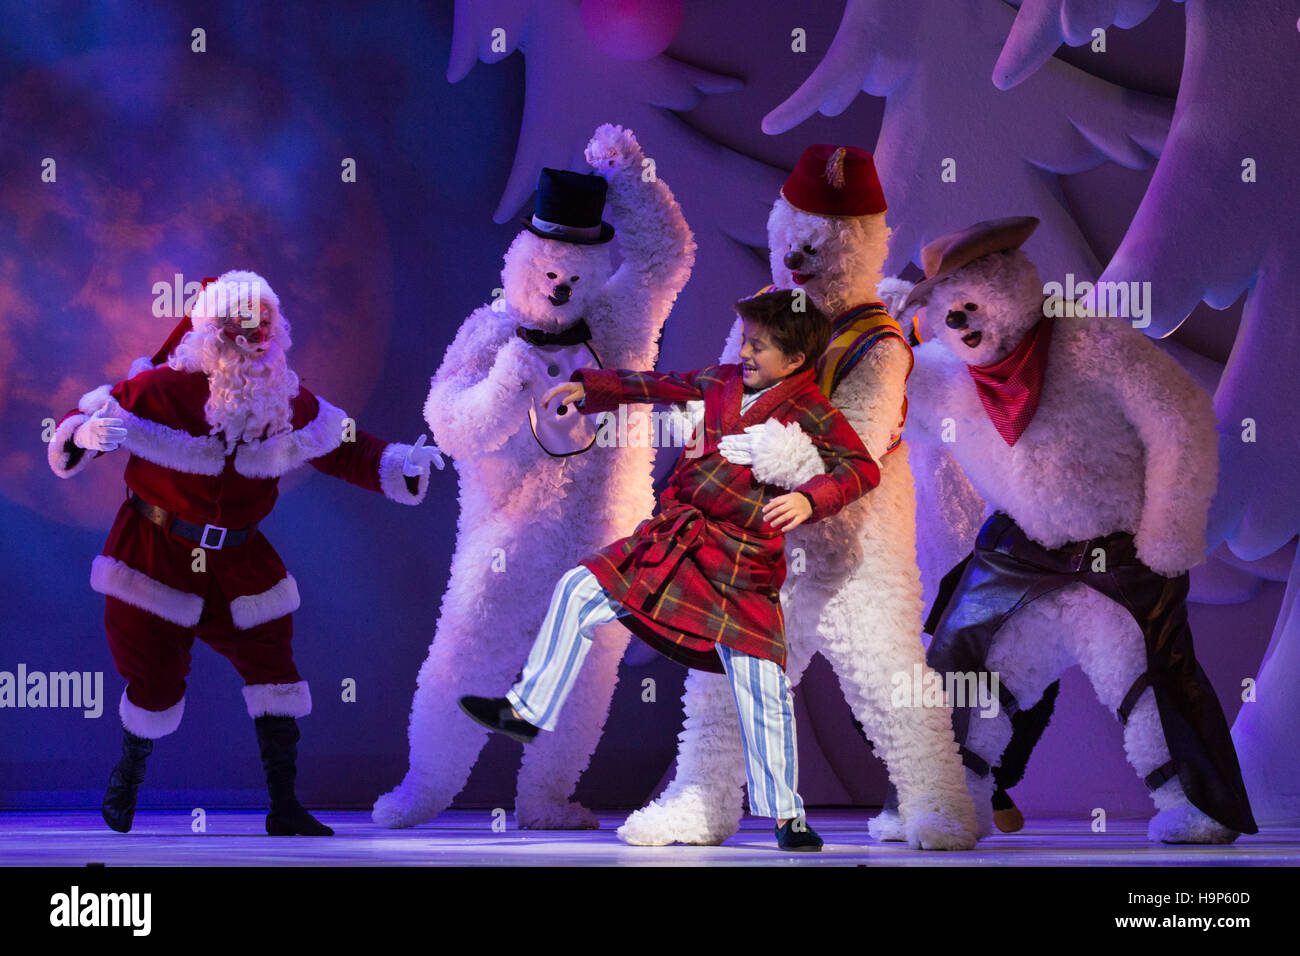 London, UK. 23 November 2016. Federico Casadei as Father Christmas and Cameron Sutherland as Boy. The Snowman returns to The Peacock theatre for the Christmas season and runs from 23 November 2016 to 1 January 2017. Based on the book by Raymond Briggs and the film directed by Dianne Jackson, the show tells the story of a young boy's adventures when his snowman comes to life on Christmas Eve. With Martin Fenton as Snowman and Cameron Sutherland as Boy. Stock Photo